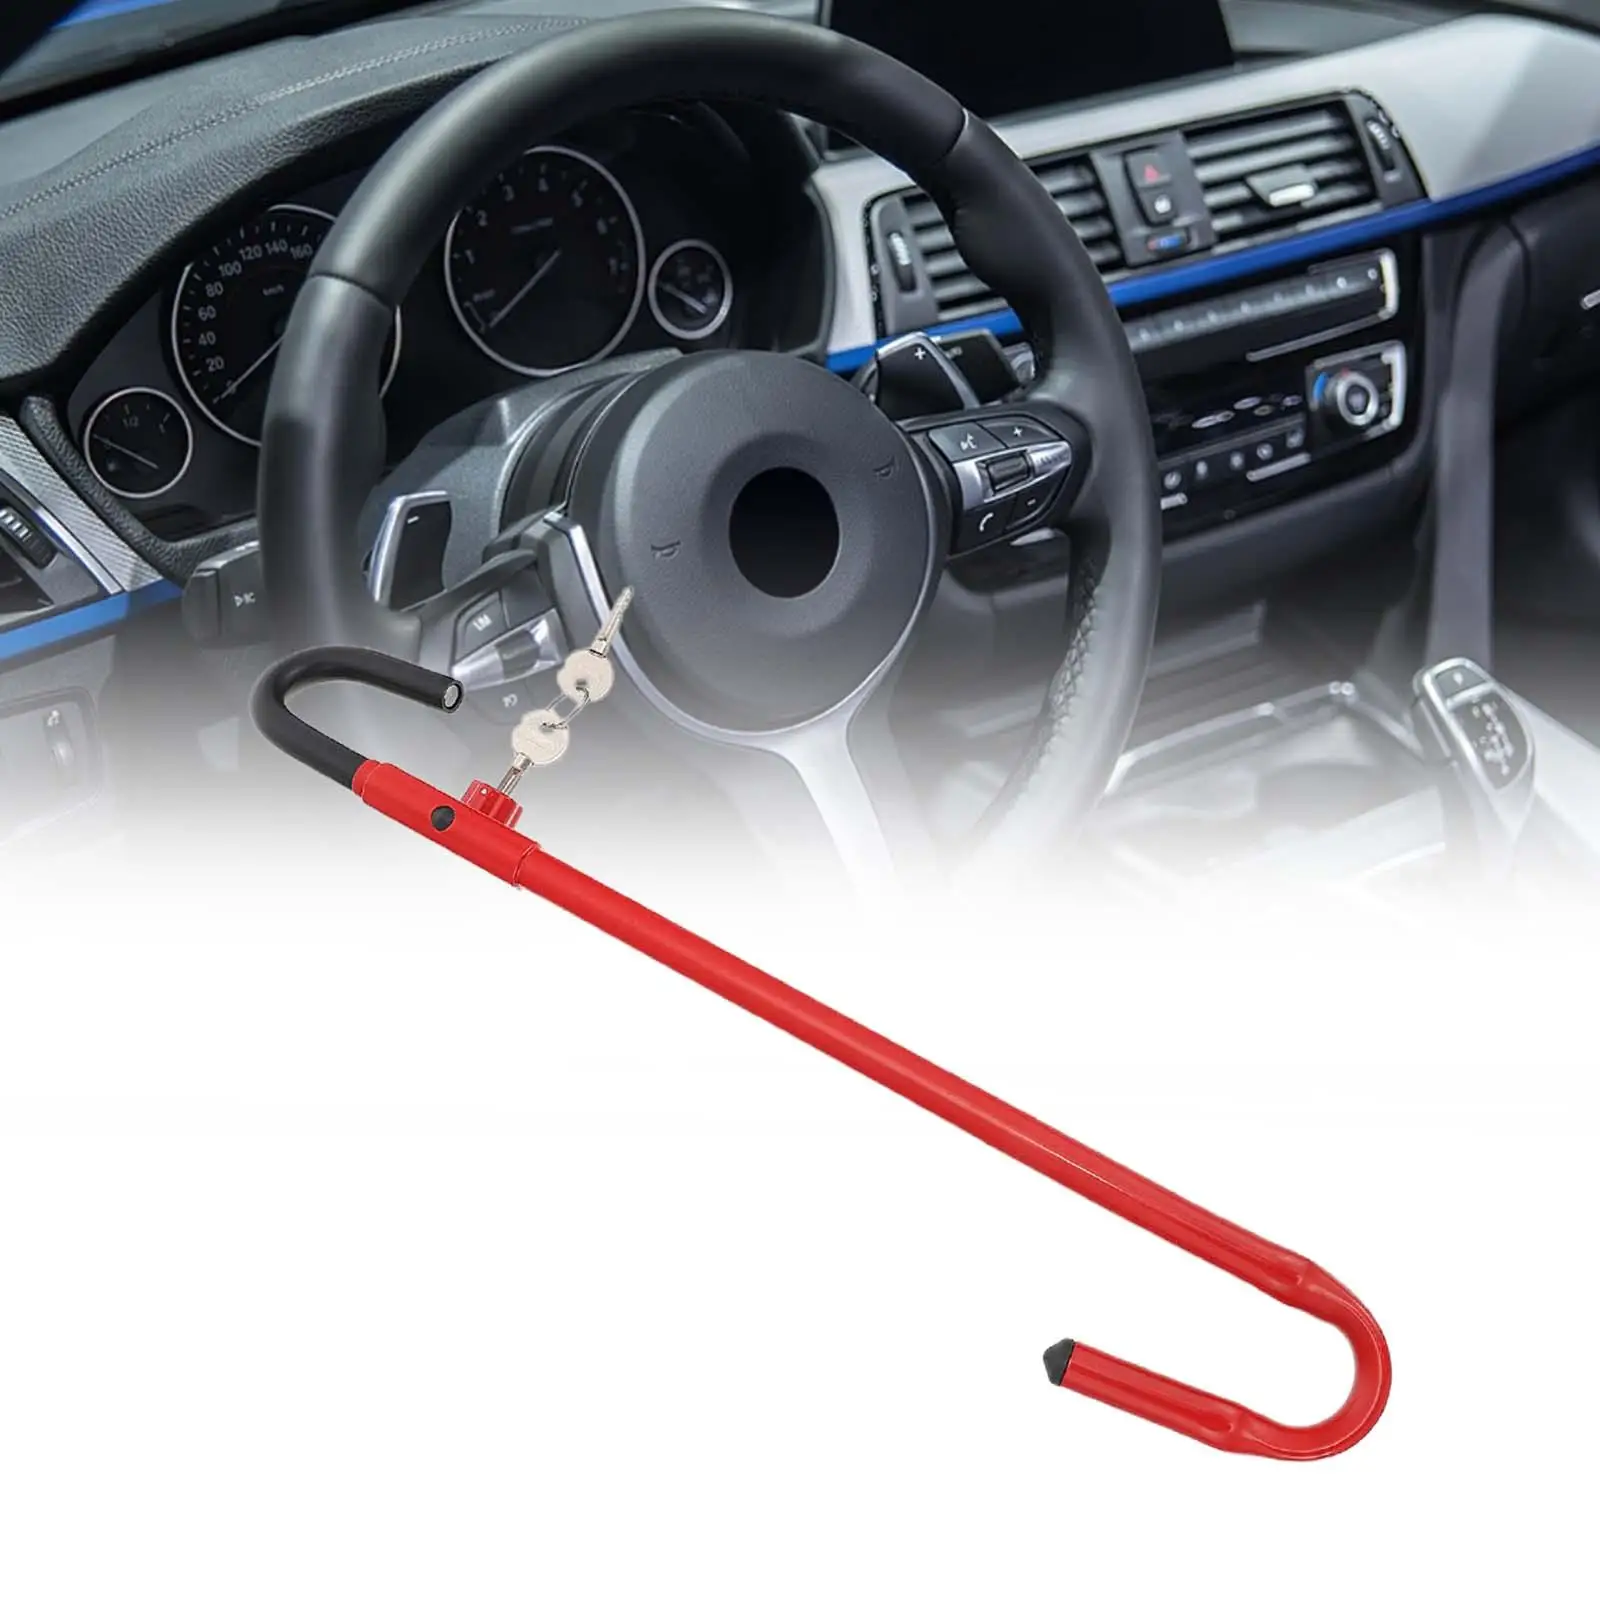 Car Steering Wheel Lock Sturdy with 2Pcs Keys Universal Durable Accessories Security Lock for Automobile SUV